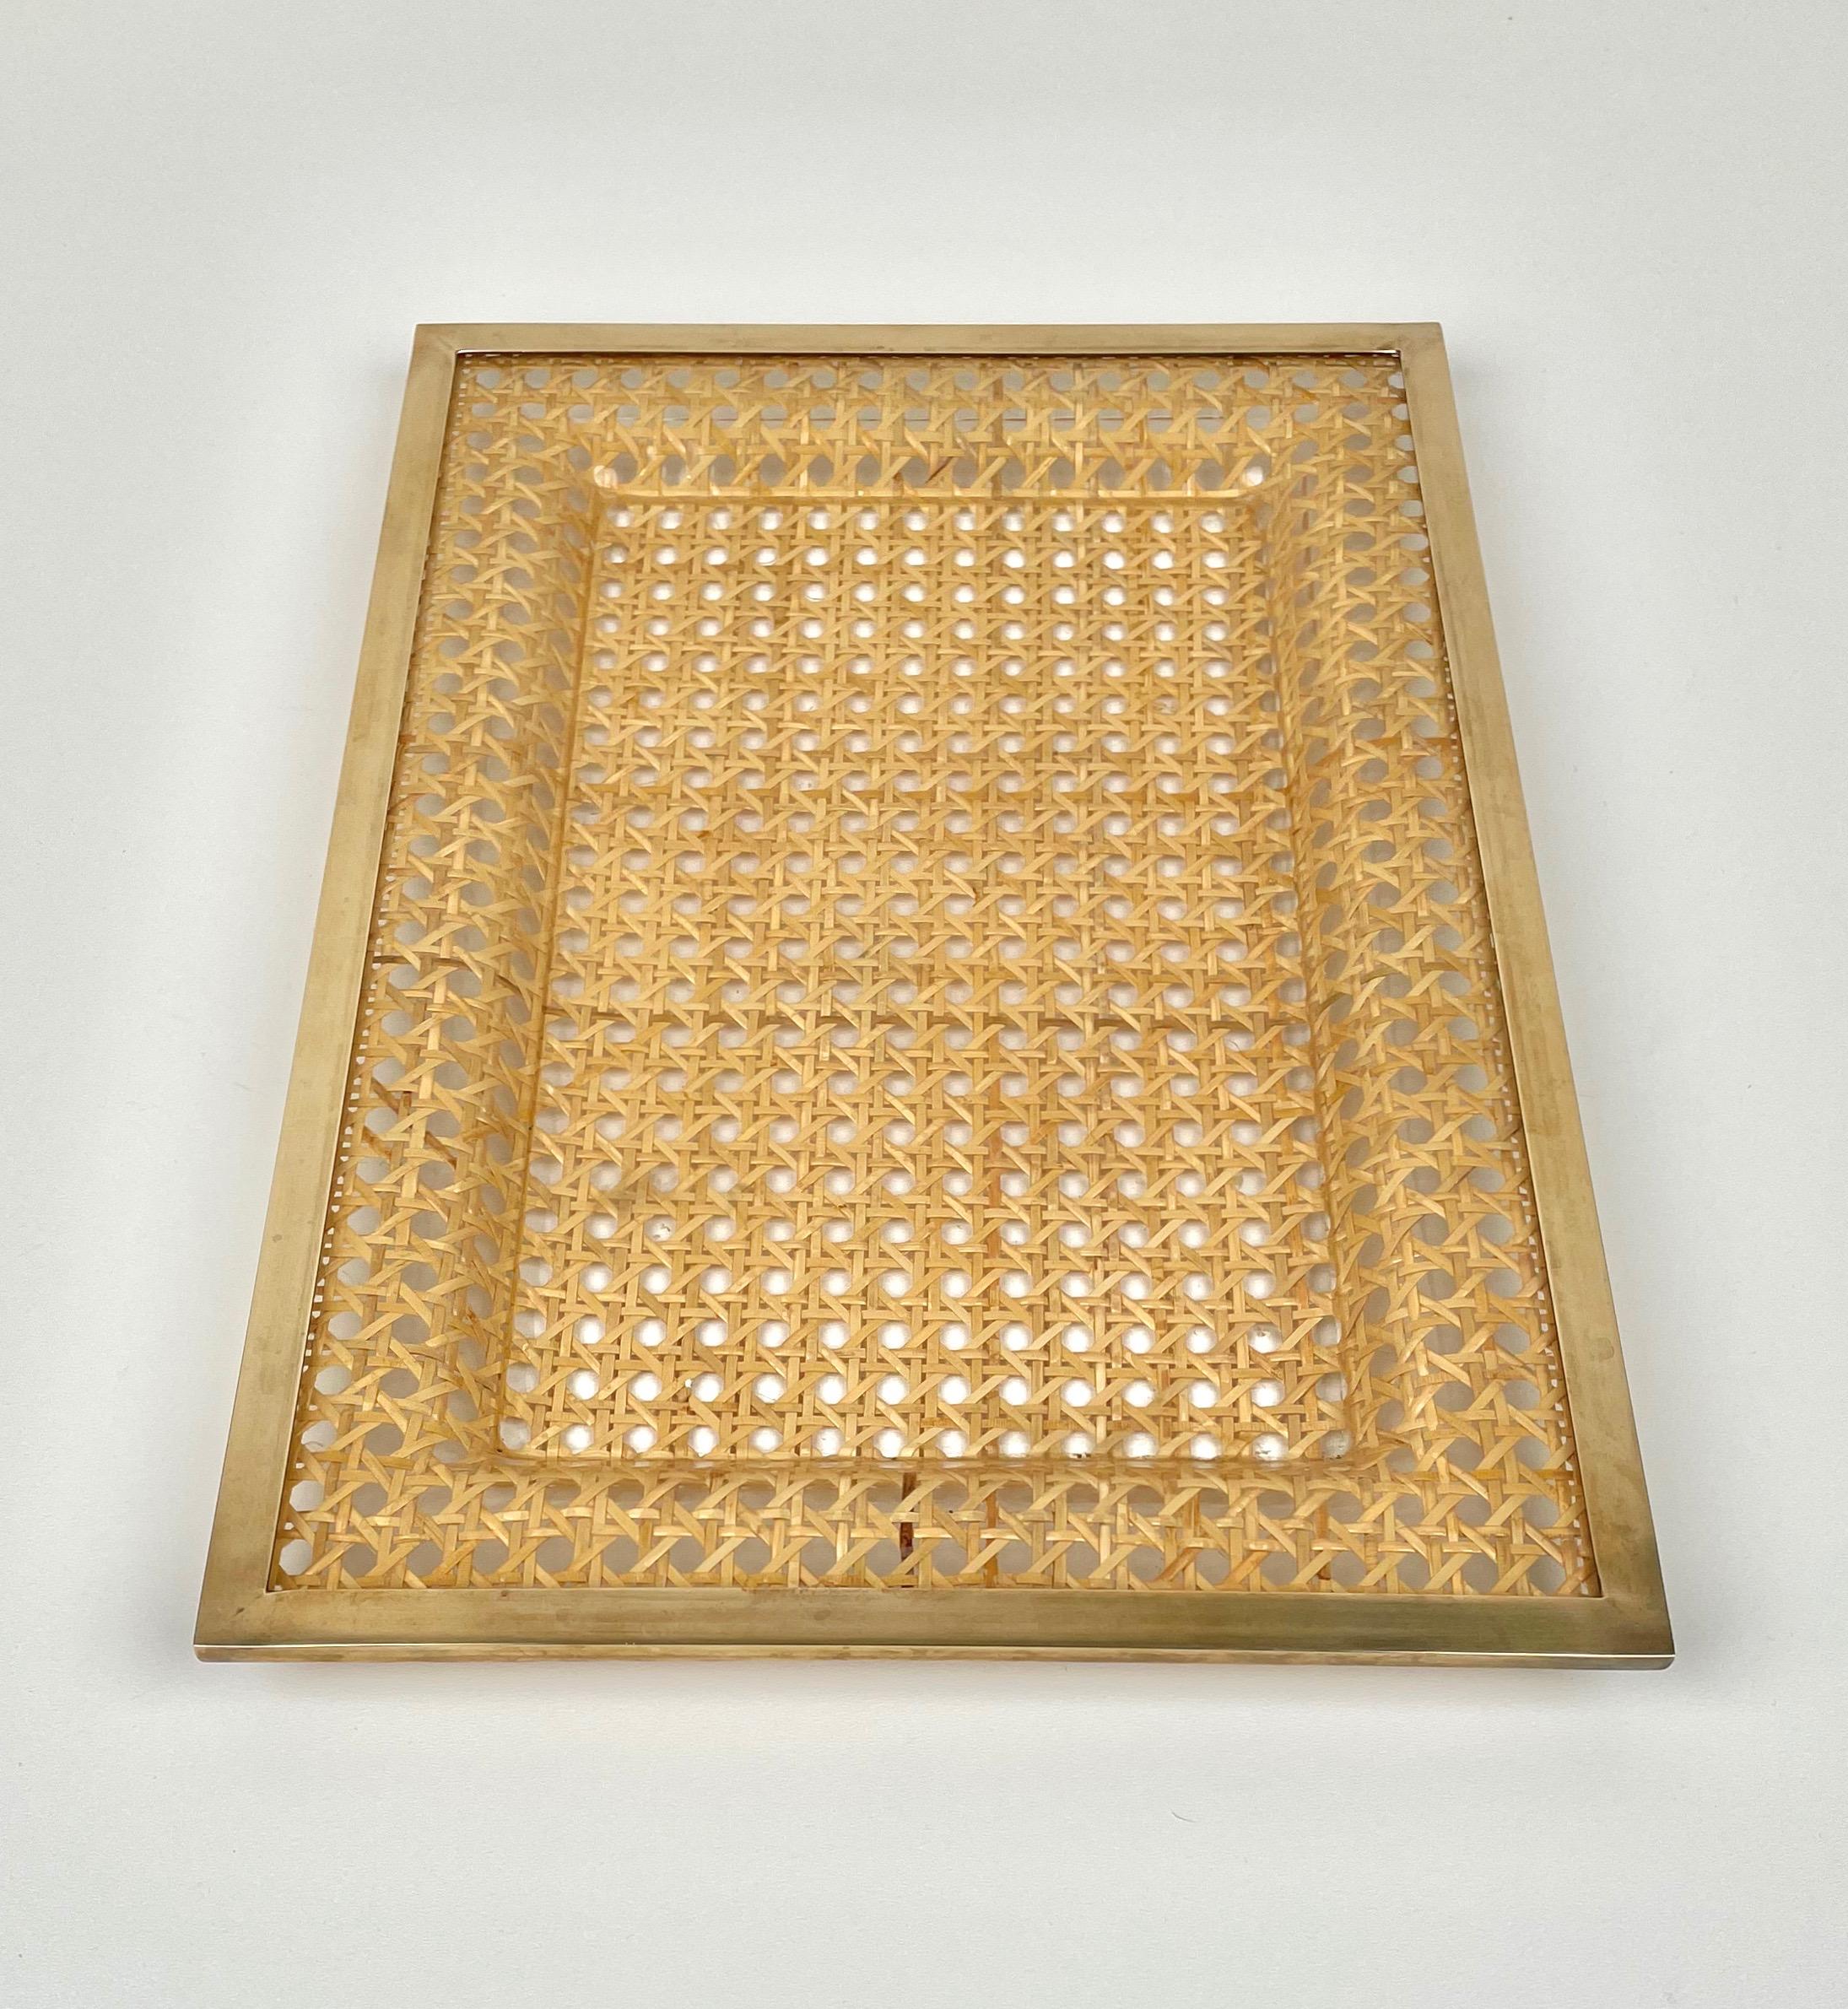 Serving tray centrepiece by Christian Dior Home in wicker, Lucite and brass frame. Made in France in the 1970s.